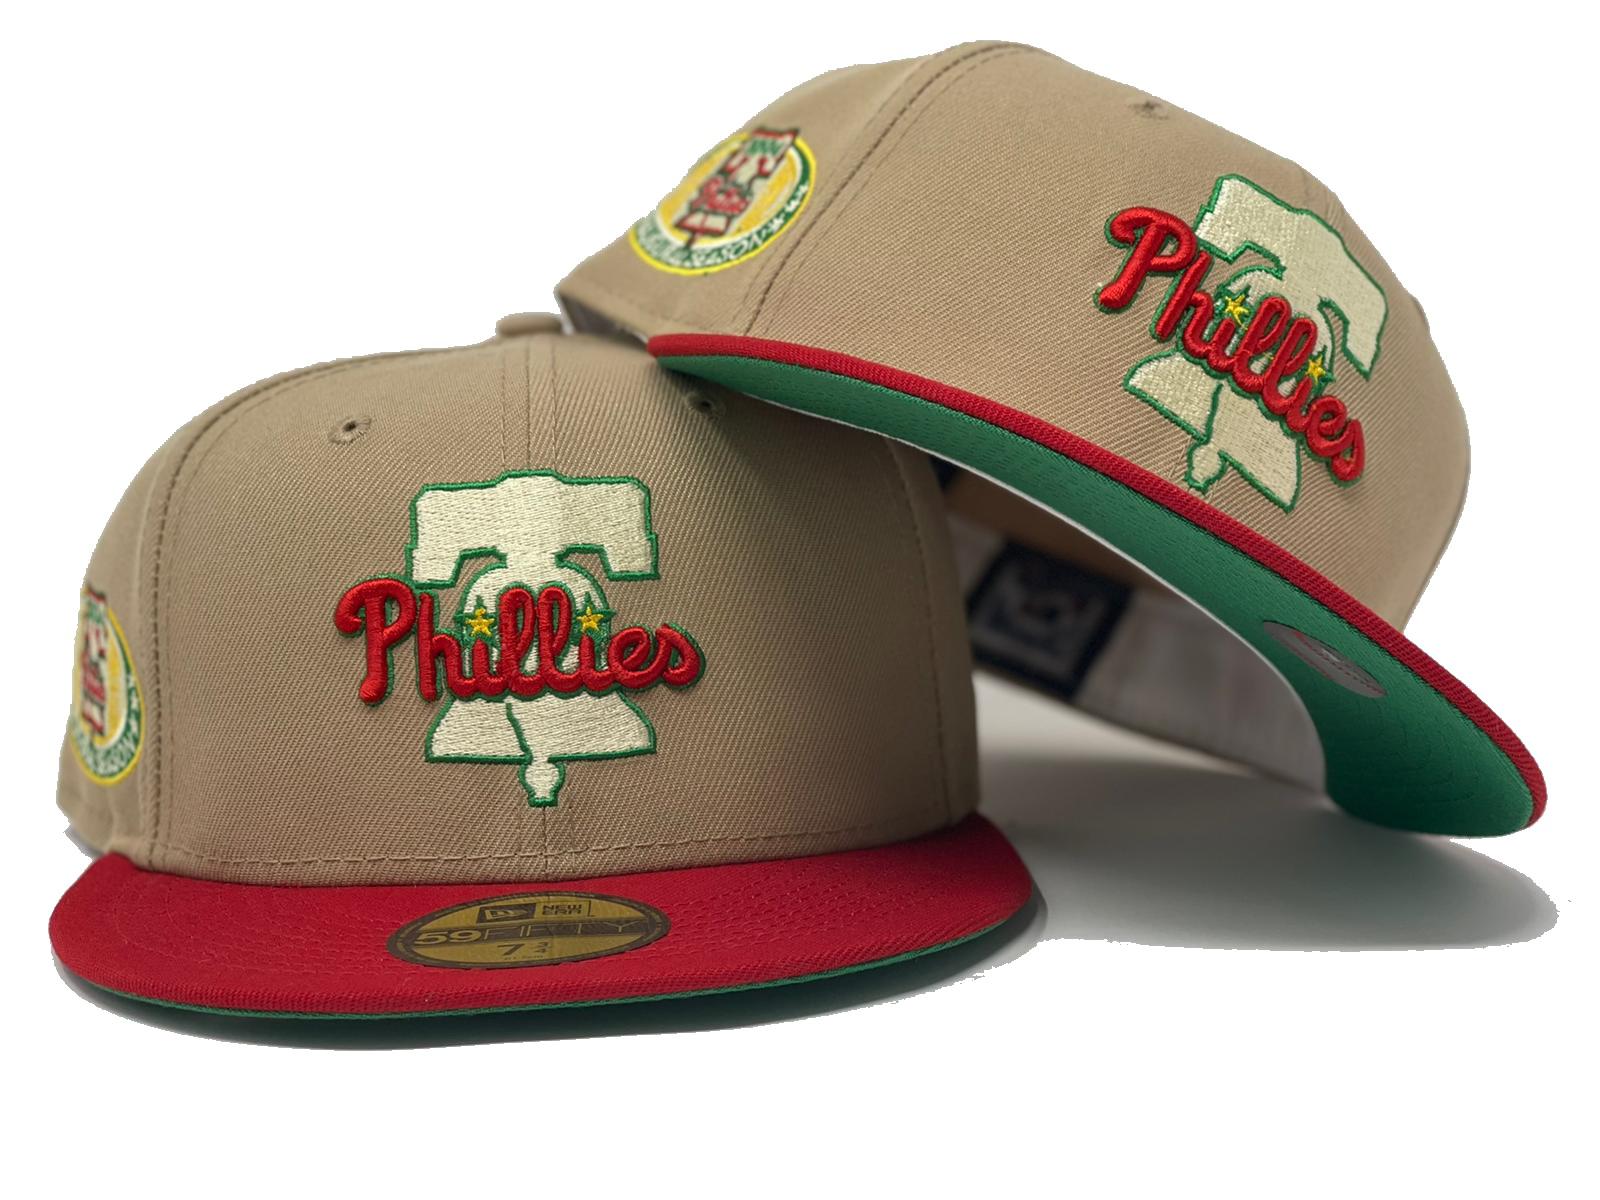 Other, Green Throwback Phillies Hat 7 38 Fitted Hat Barely Worn